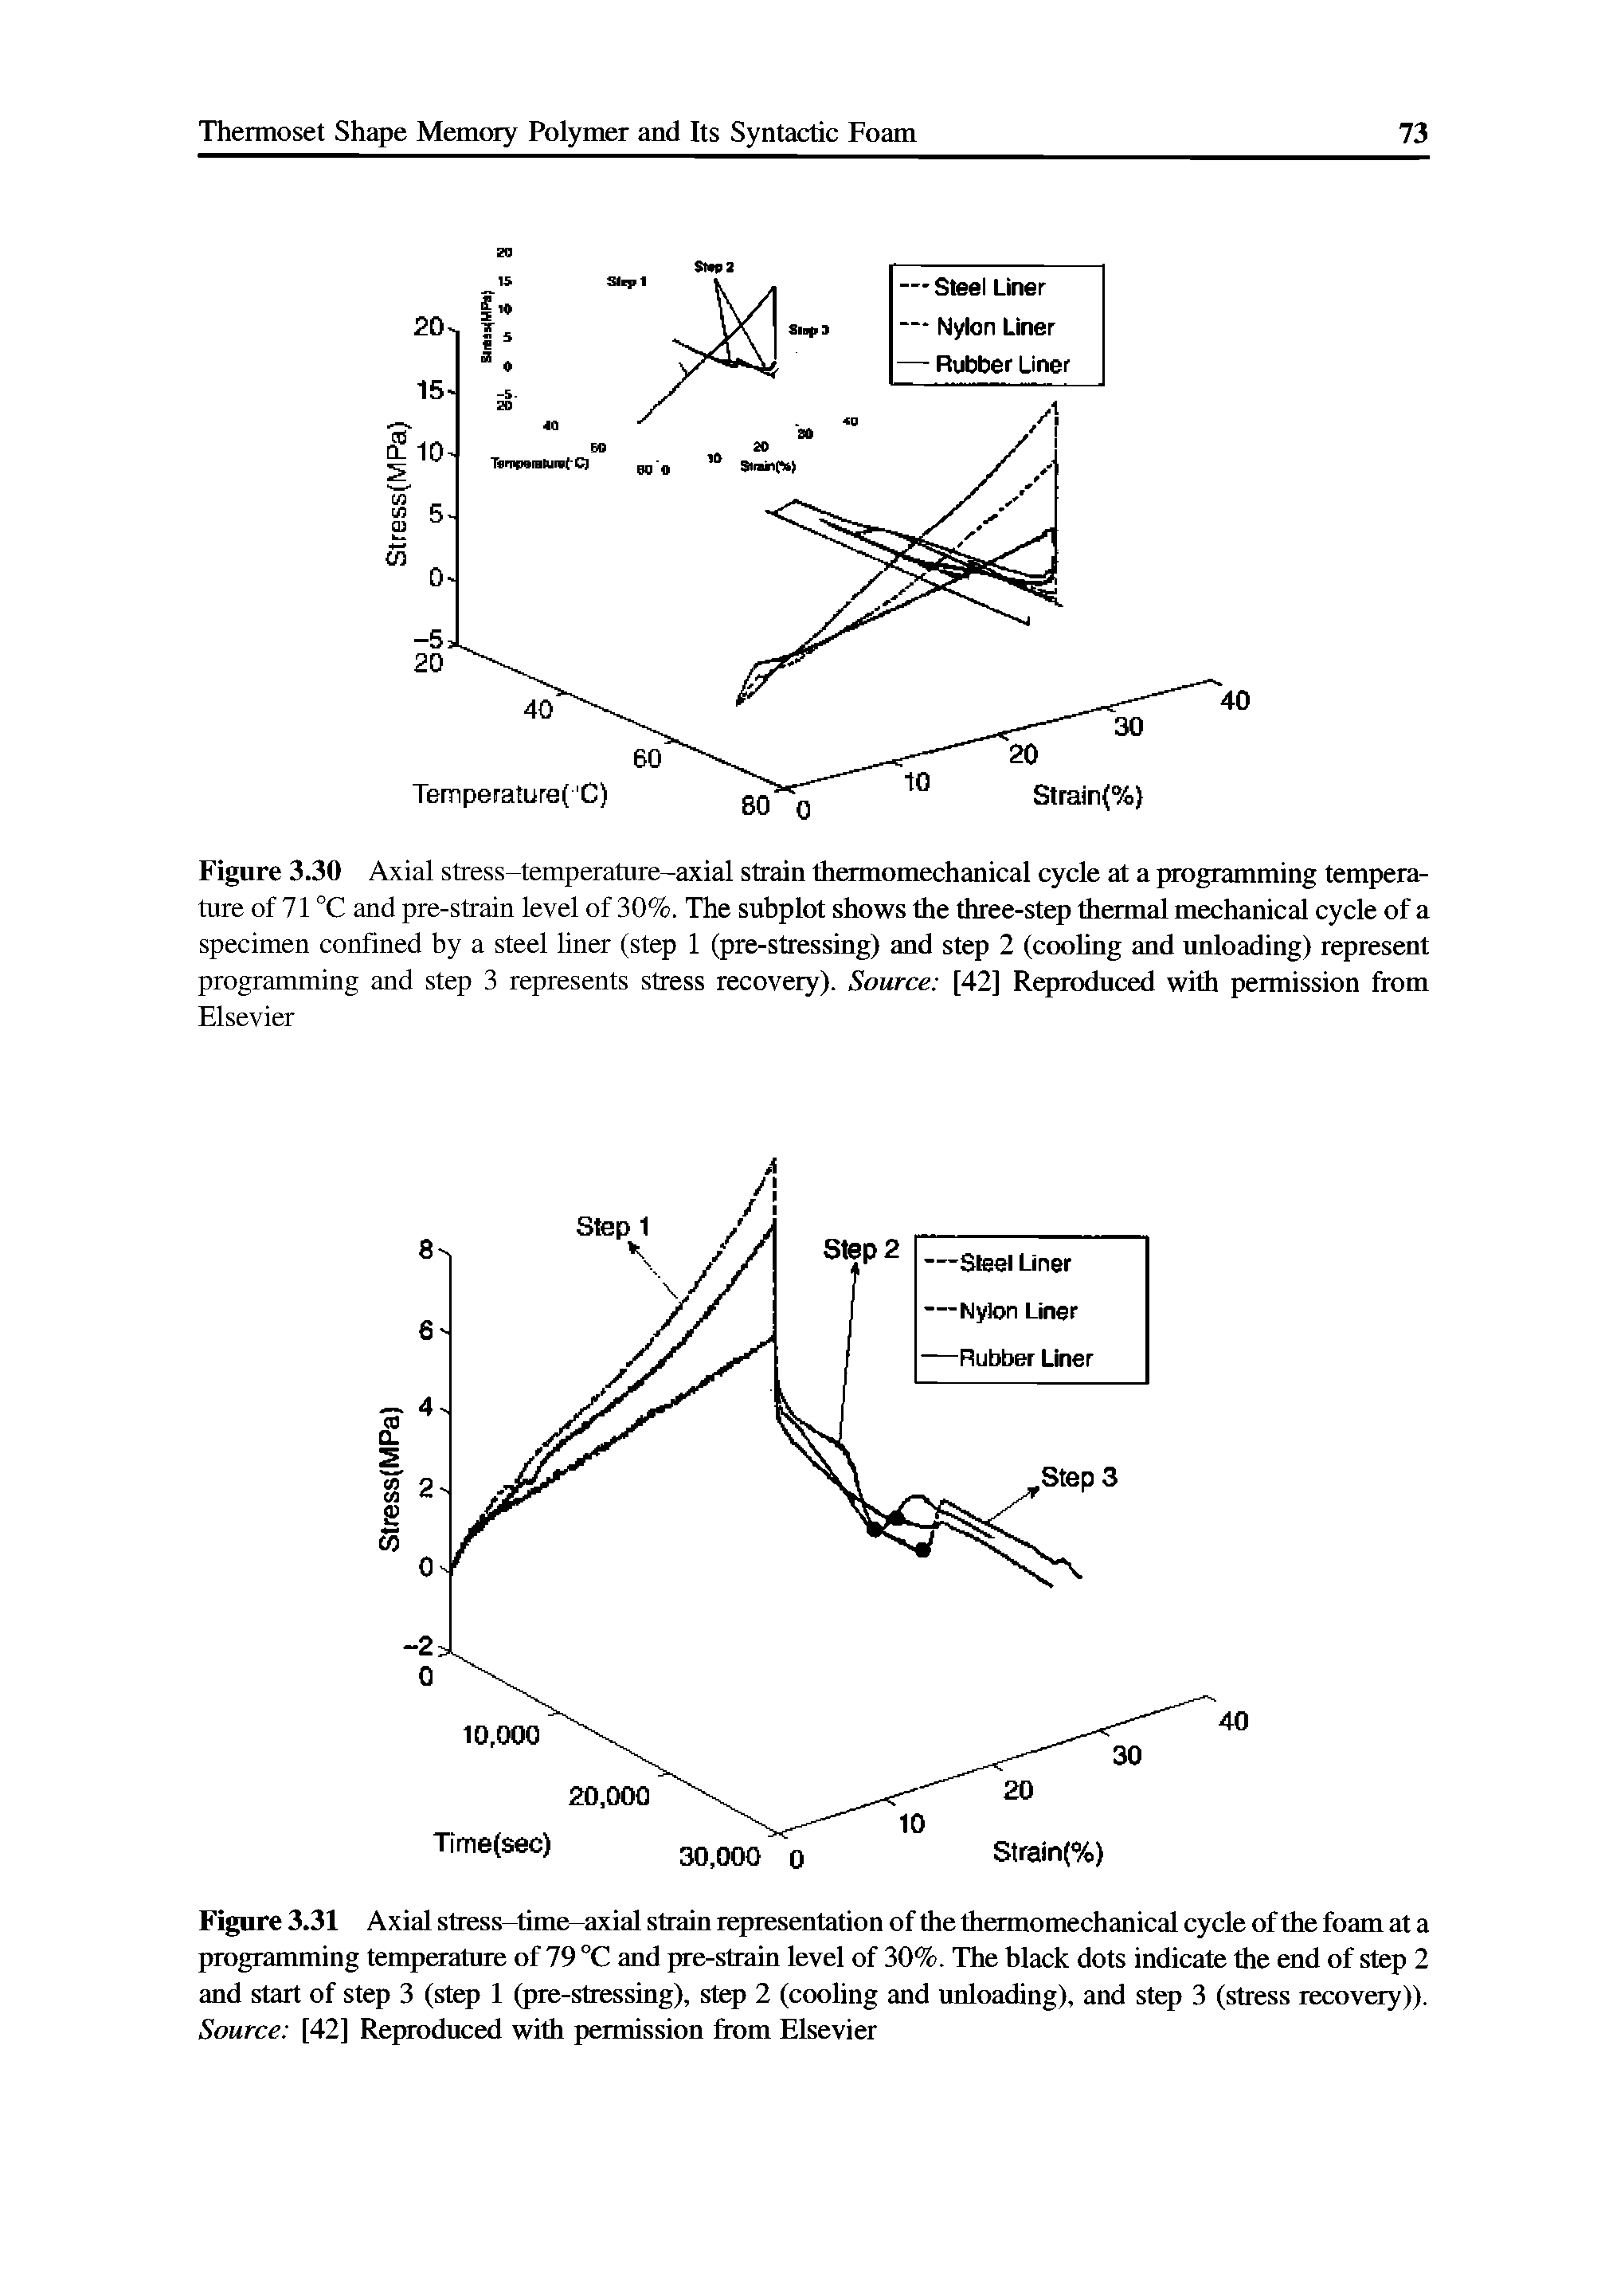 Figure 3.31 Axial stress-time-axial strain representation of the thermomechanical cycle of the foam at a programming temperature of 79 °C and pre-strain level of 30%. The black dots indicate the end of step 2 and start of step 3 (step 1 (pre-stressing), step 2 (cooling and unloading), and step 3 (stress recovery)). Source [42] Reproduced with permission from Elsevier...